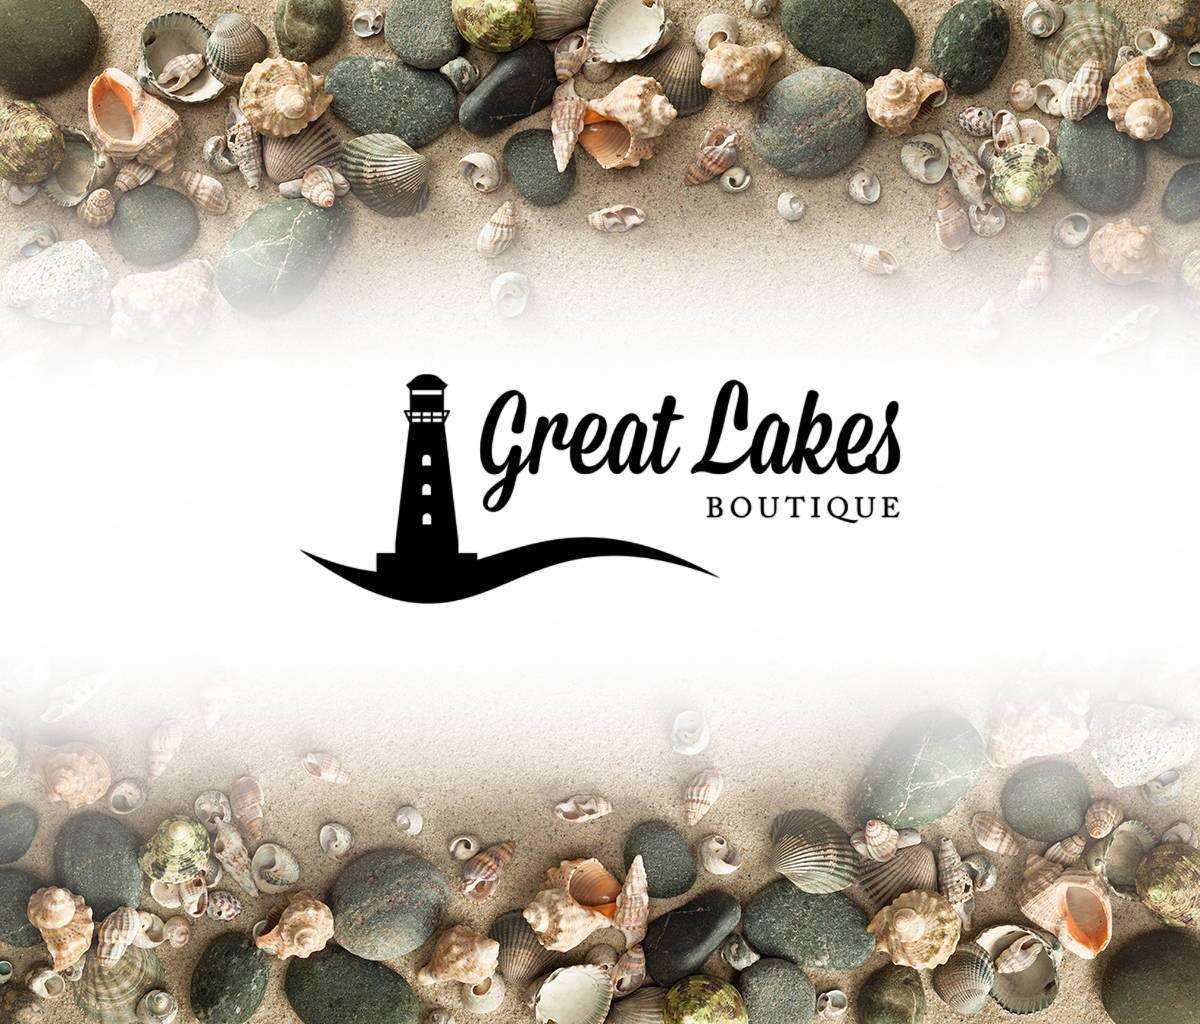 Great Lakes Boutique Trollbeads Summer Trunk Show Begins!